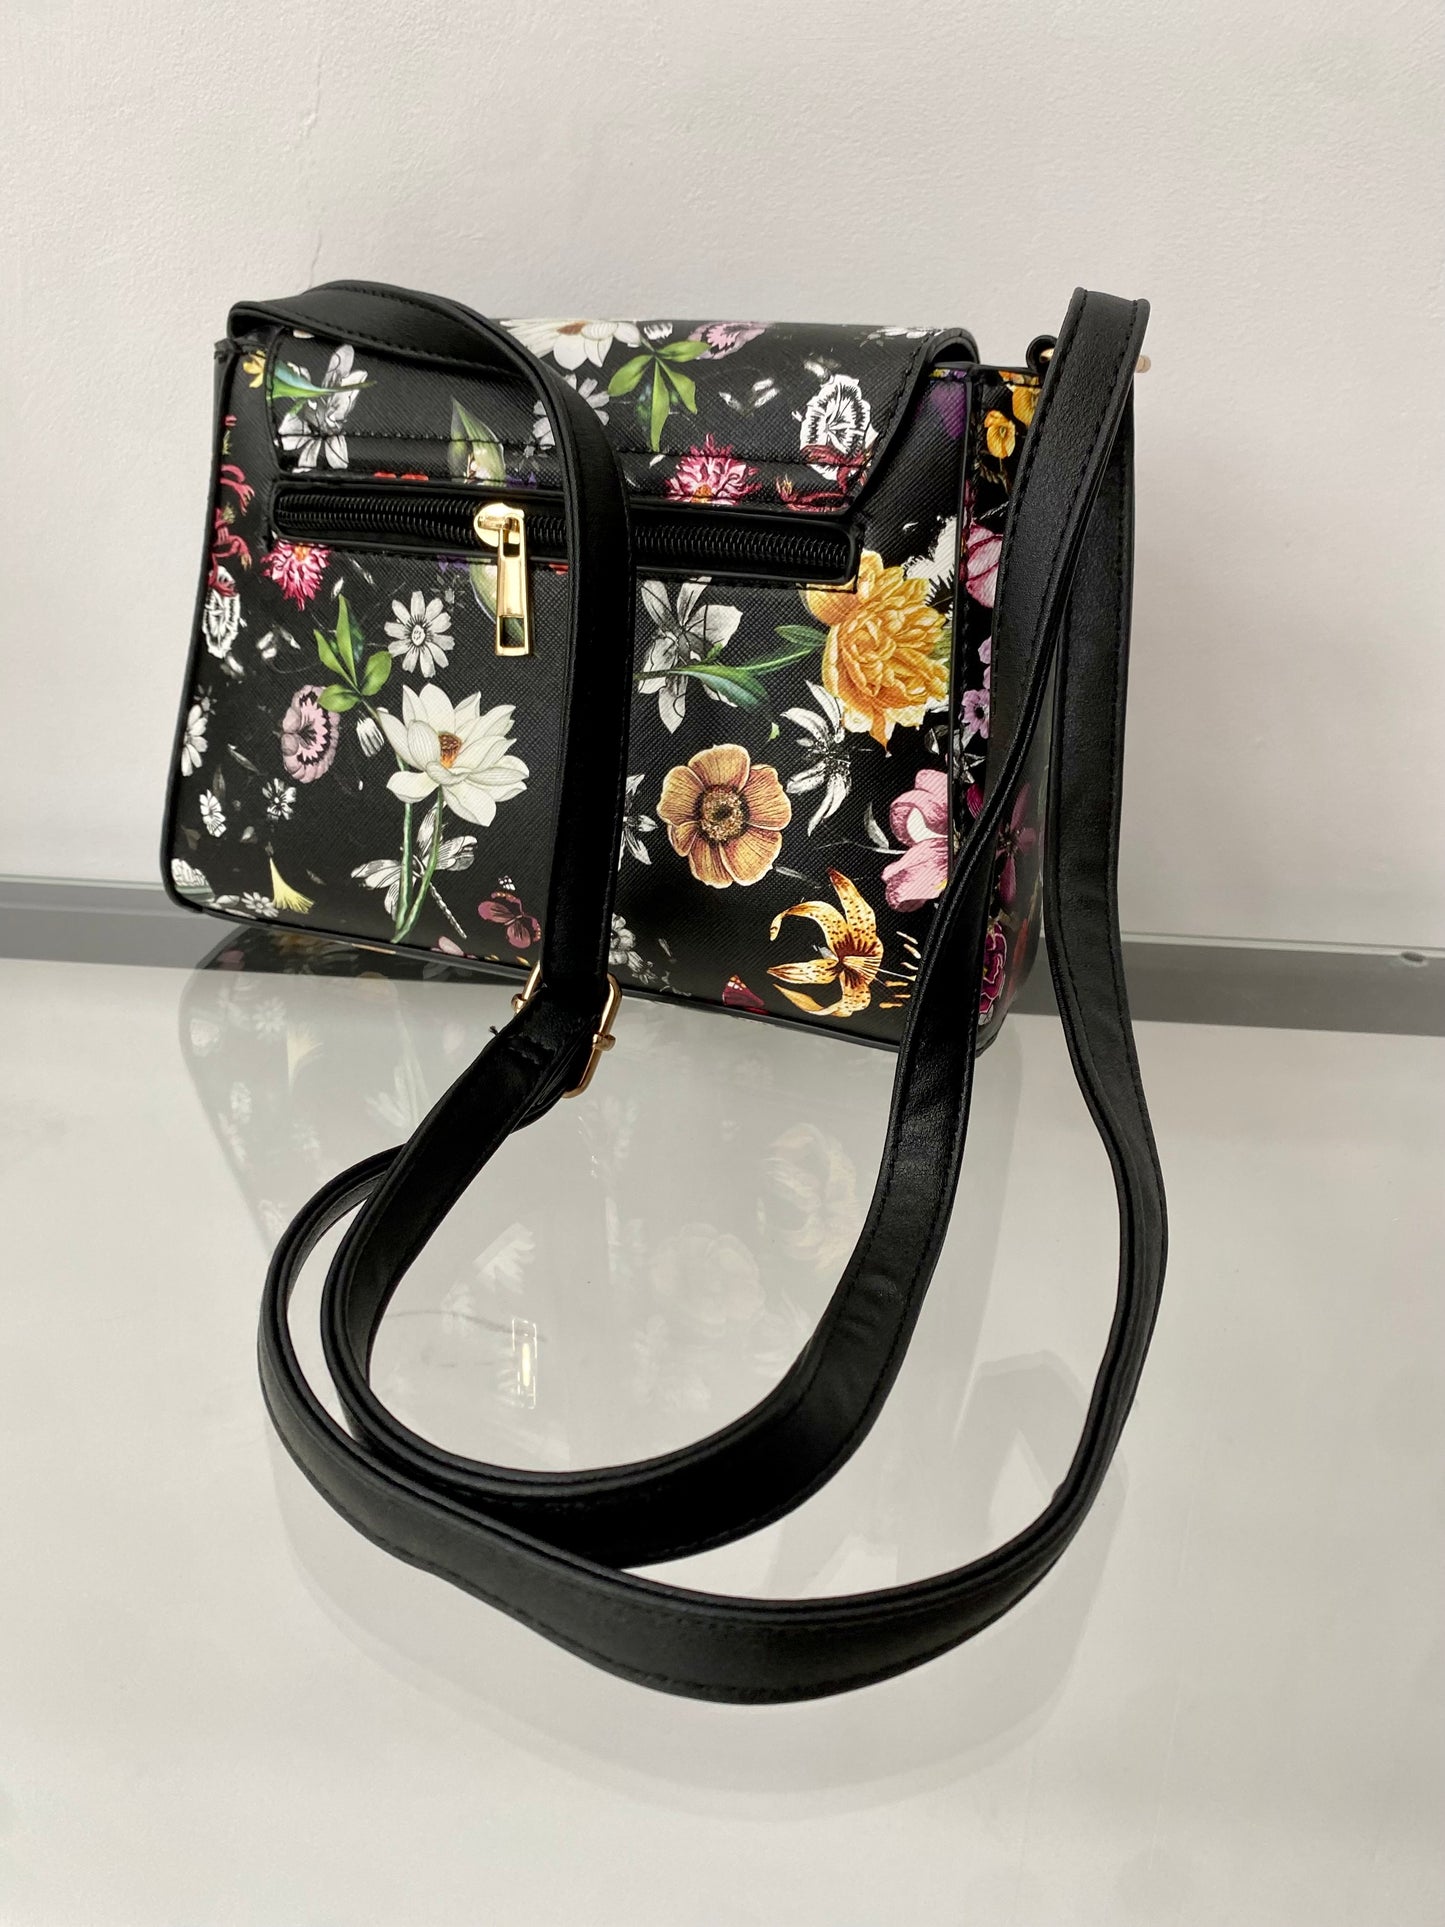 Bolso Floral negro